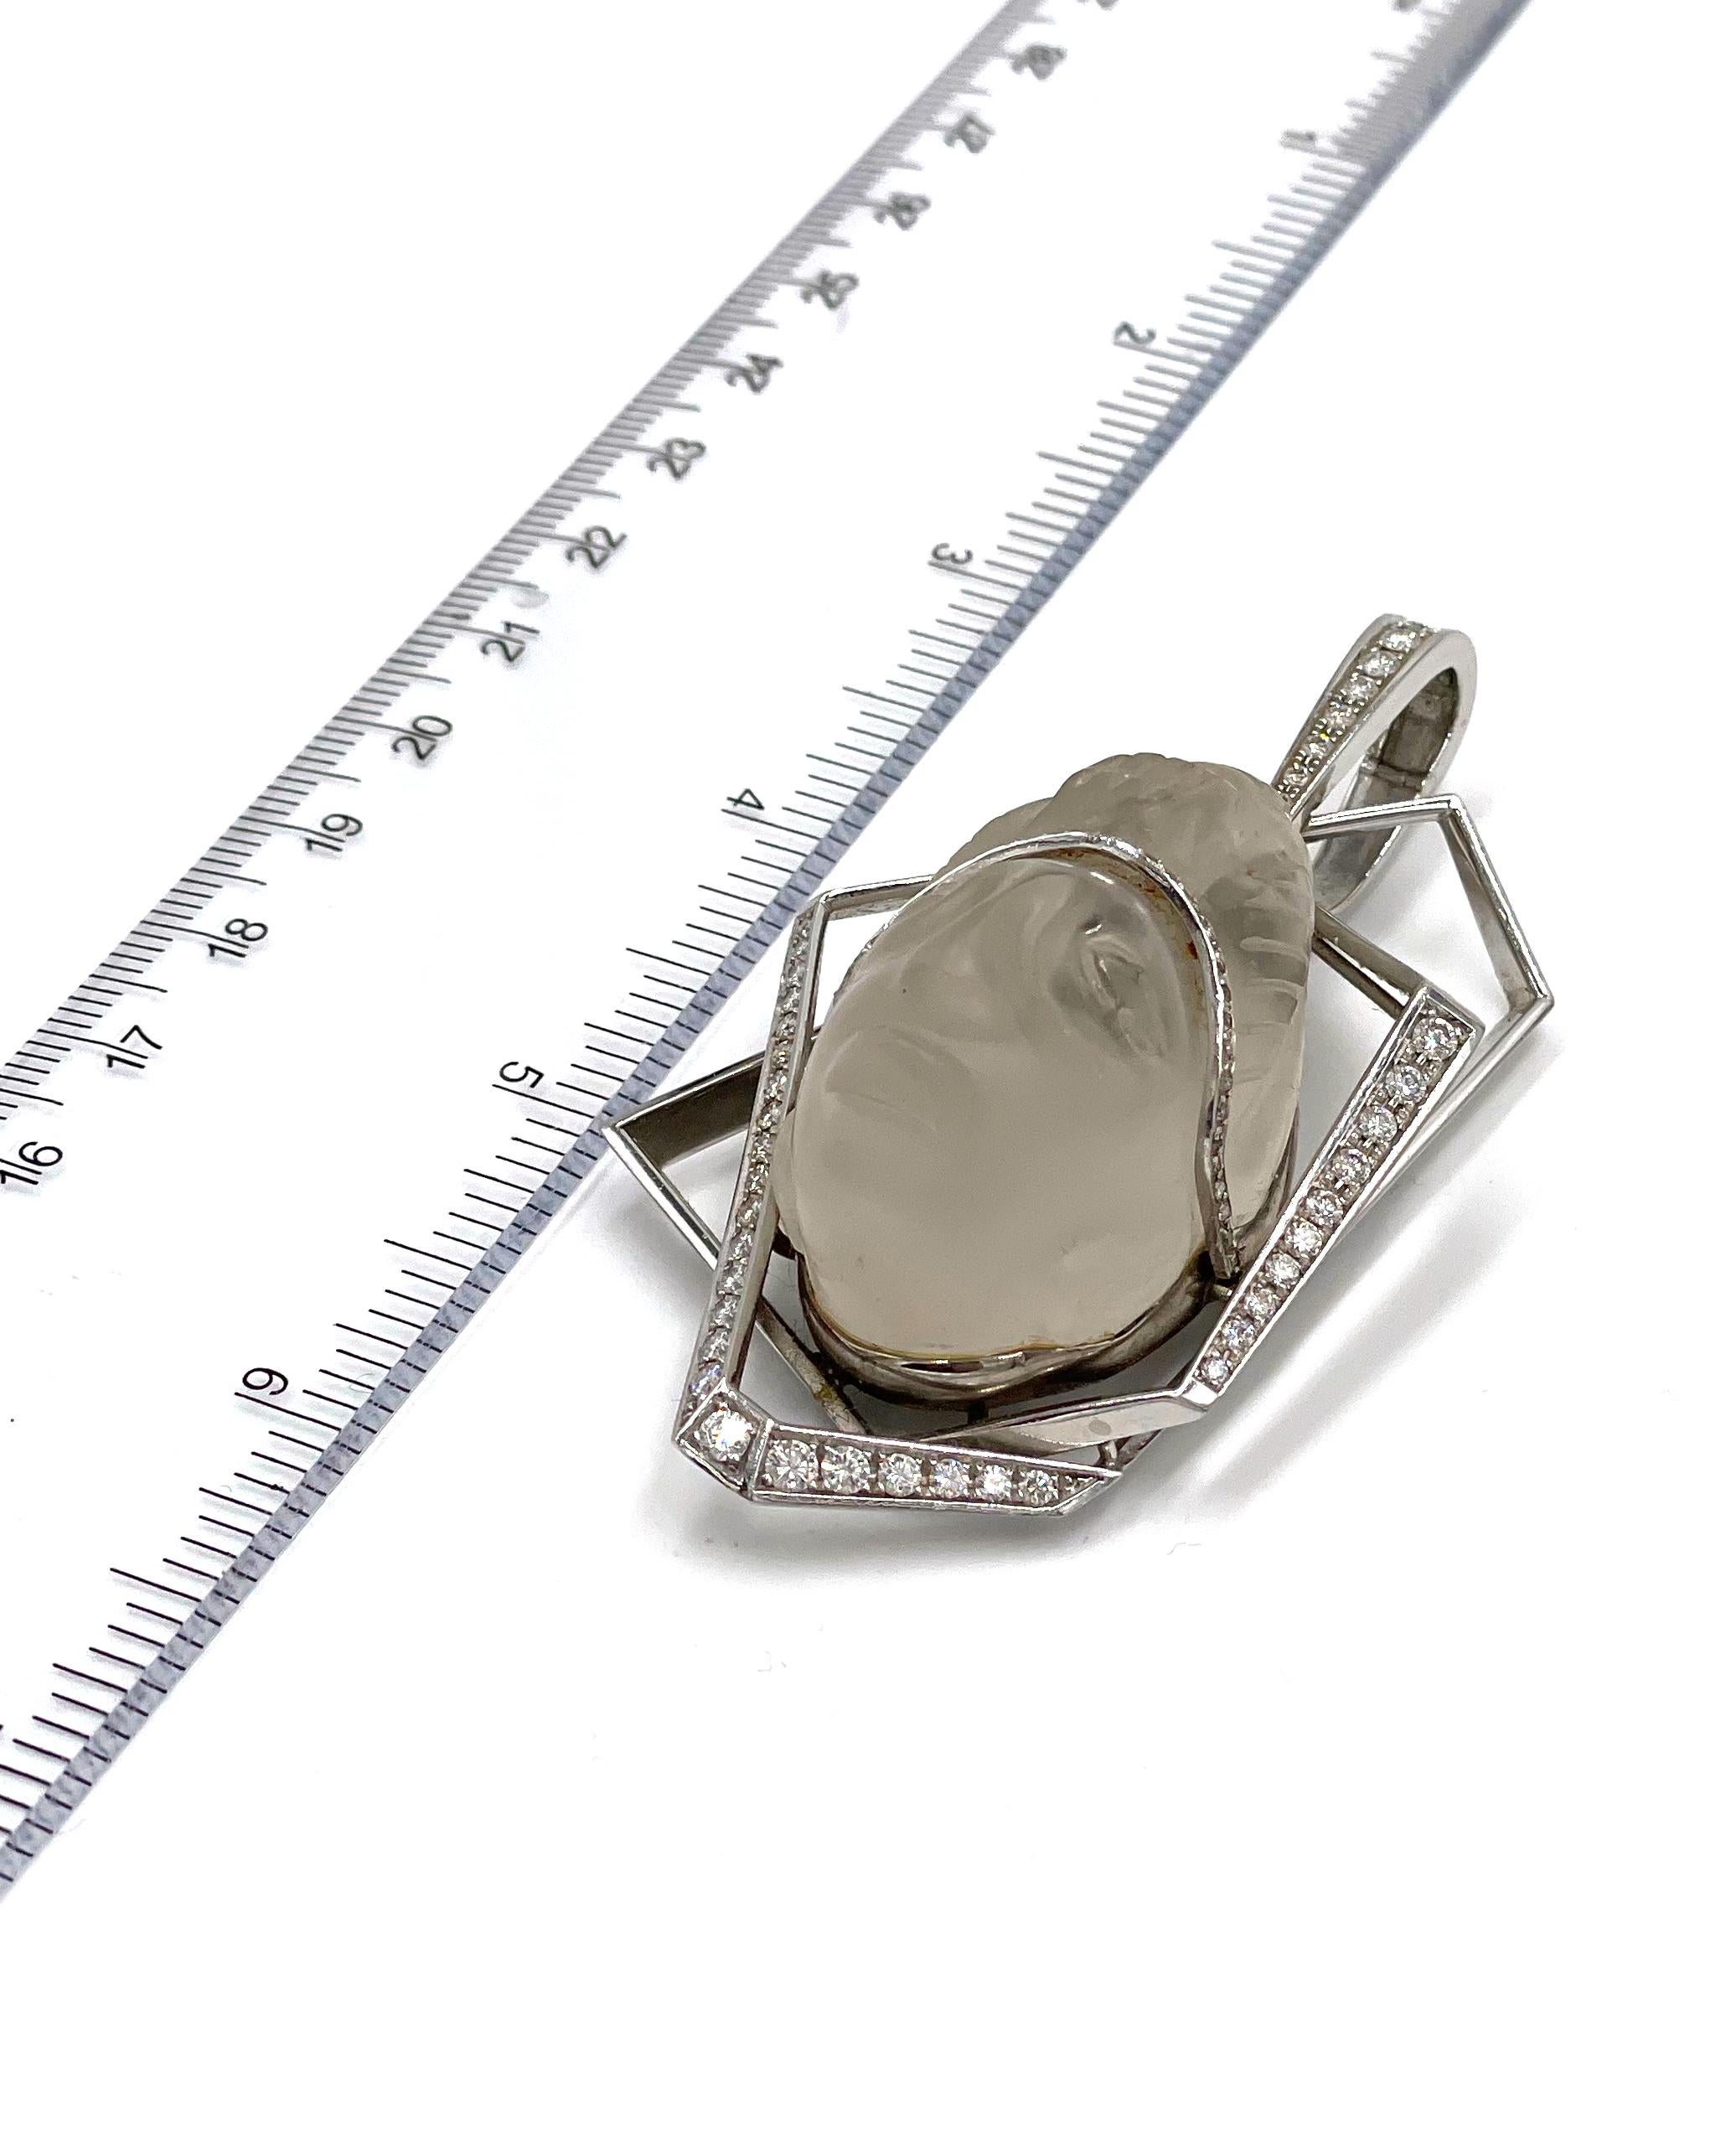 Platinum Mesoamerican Pendant with Carved Rock Crystal & Diamond In Good Condition For Sale In Old Tappan, NJ